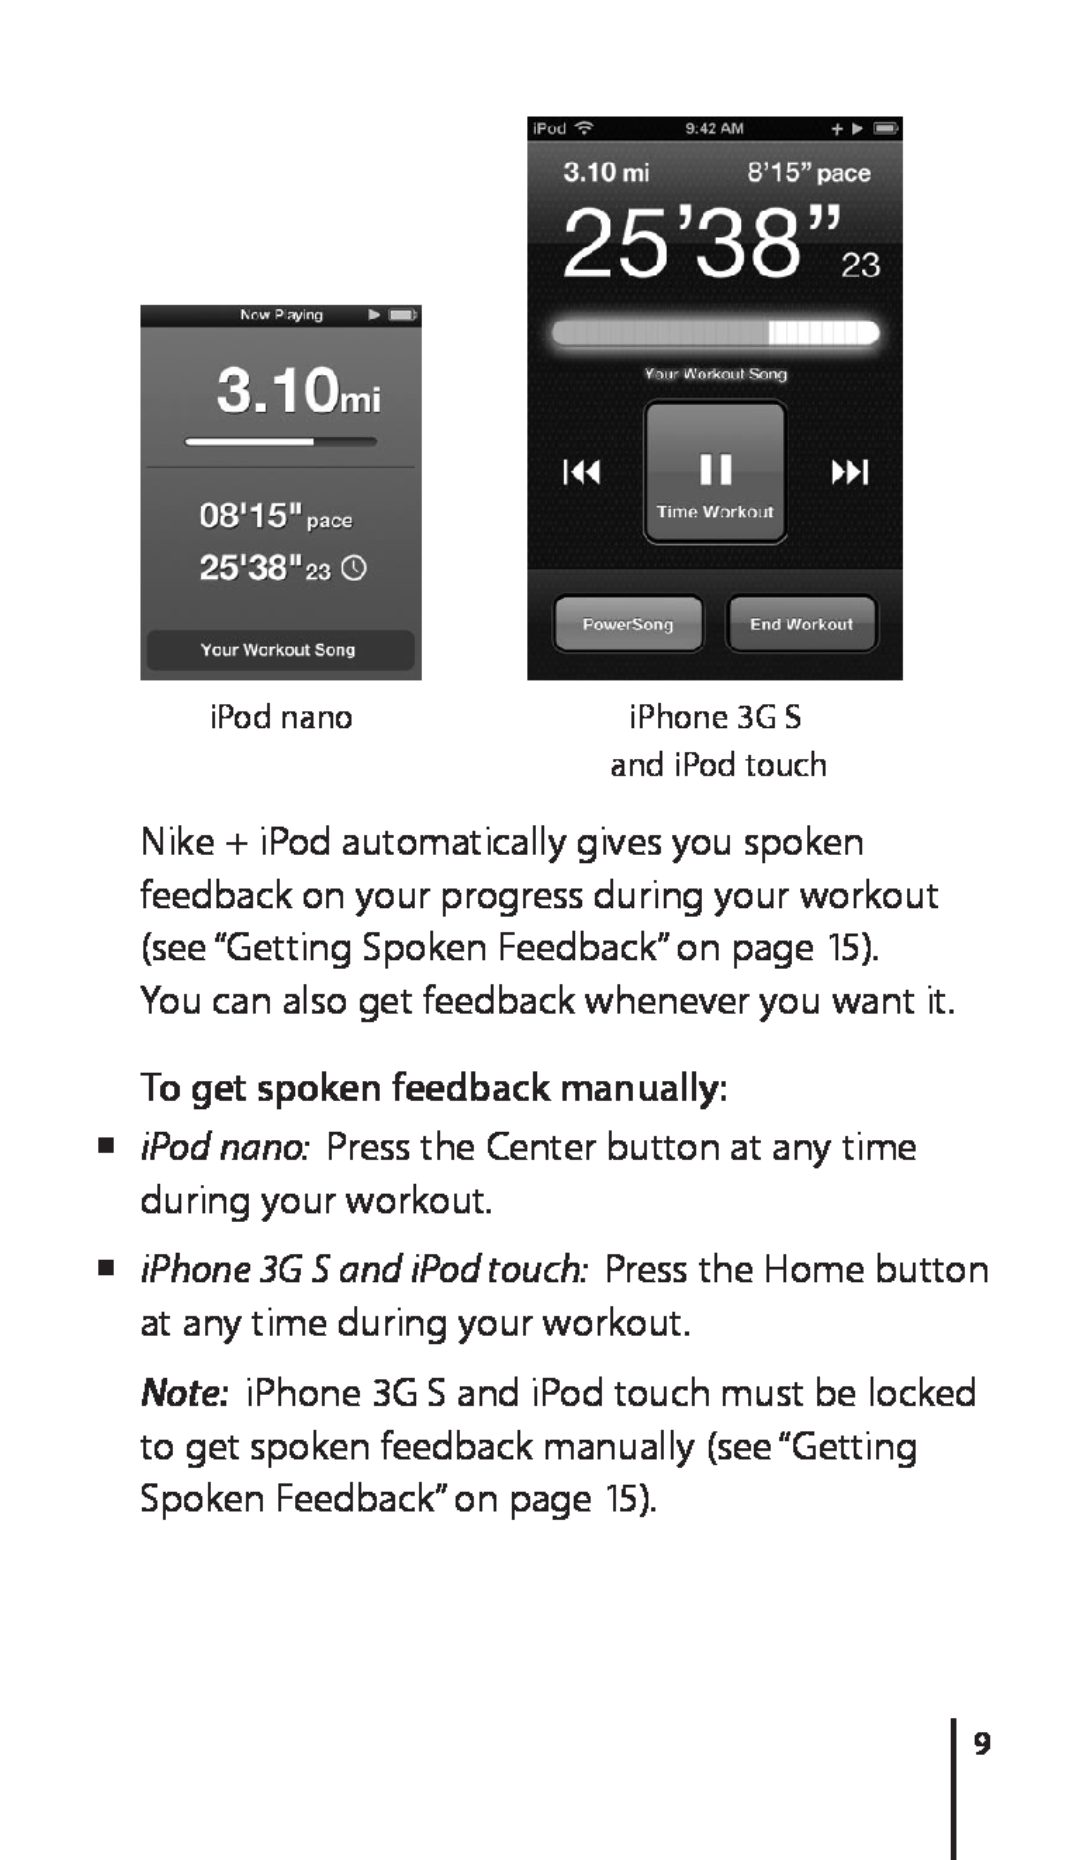 Apple 034-4945-A To get spoken feedback manually, mm iPod nano Press the Center button at any time during your workout 